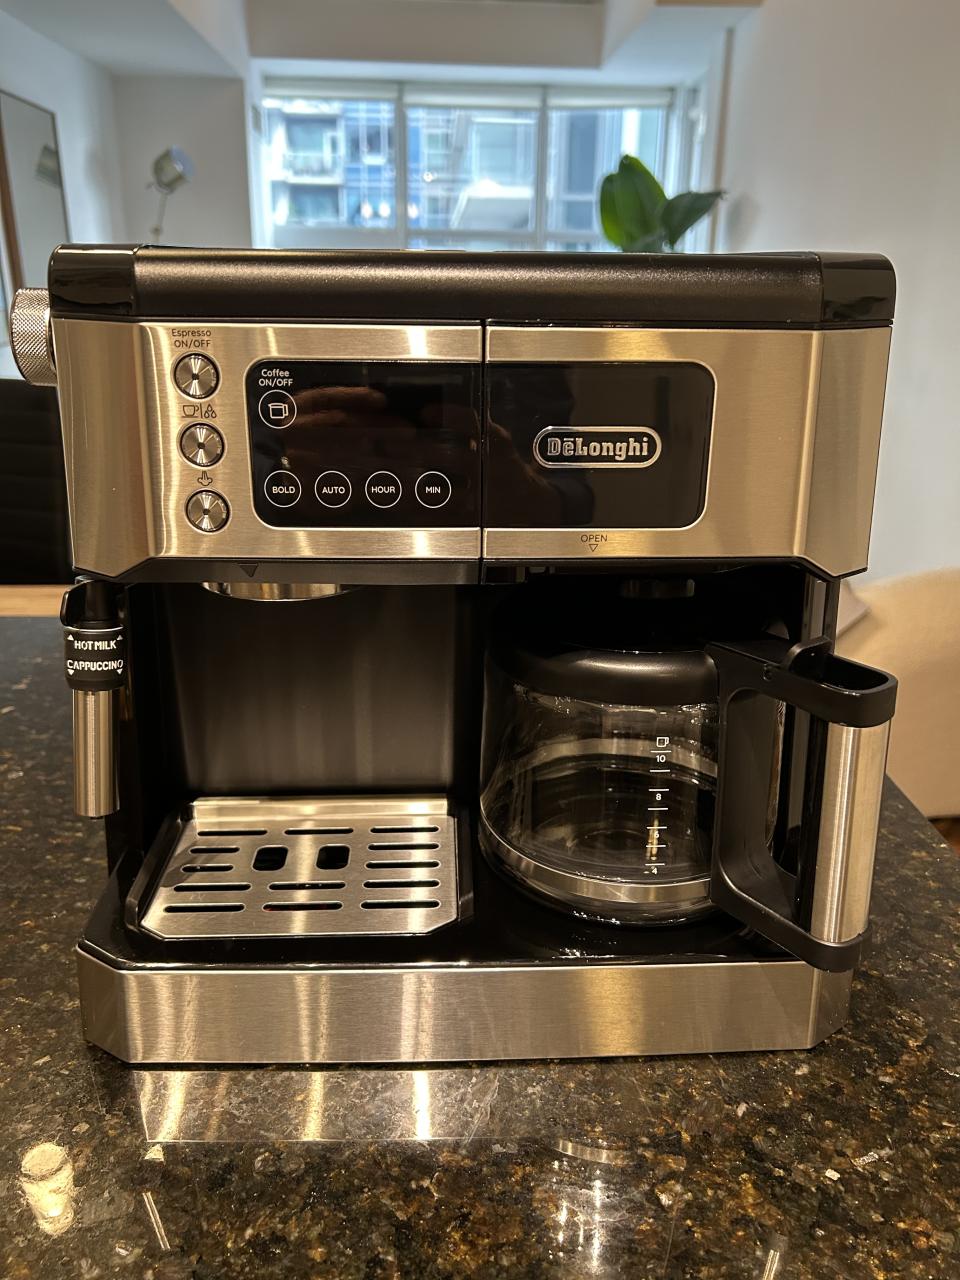 Whether you're in need of a hearty coffee or a quick espresso, the All-In-One has you covered.